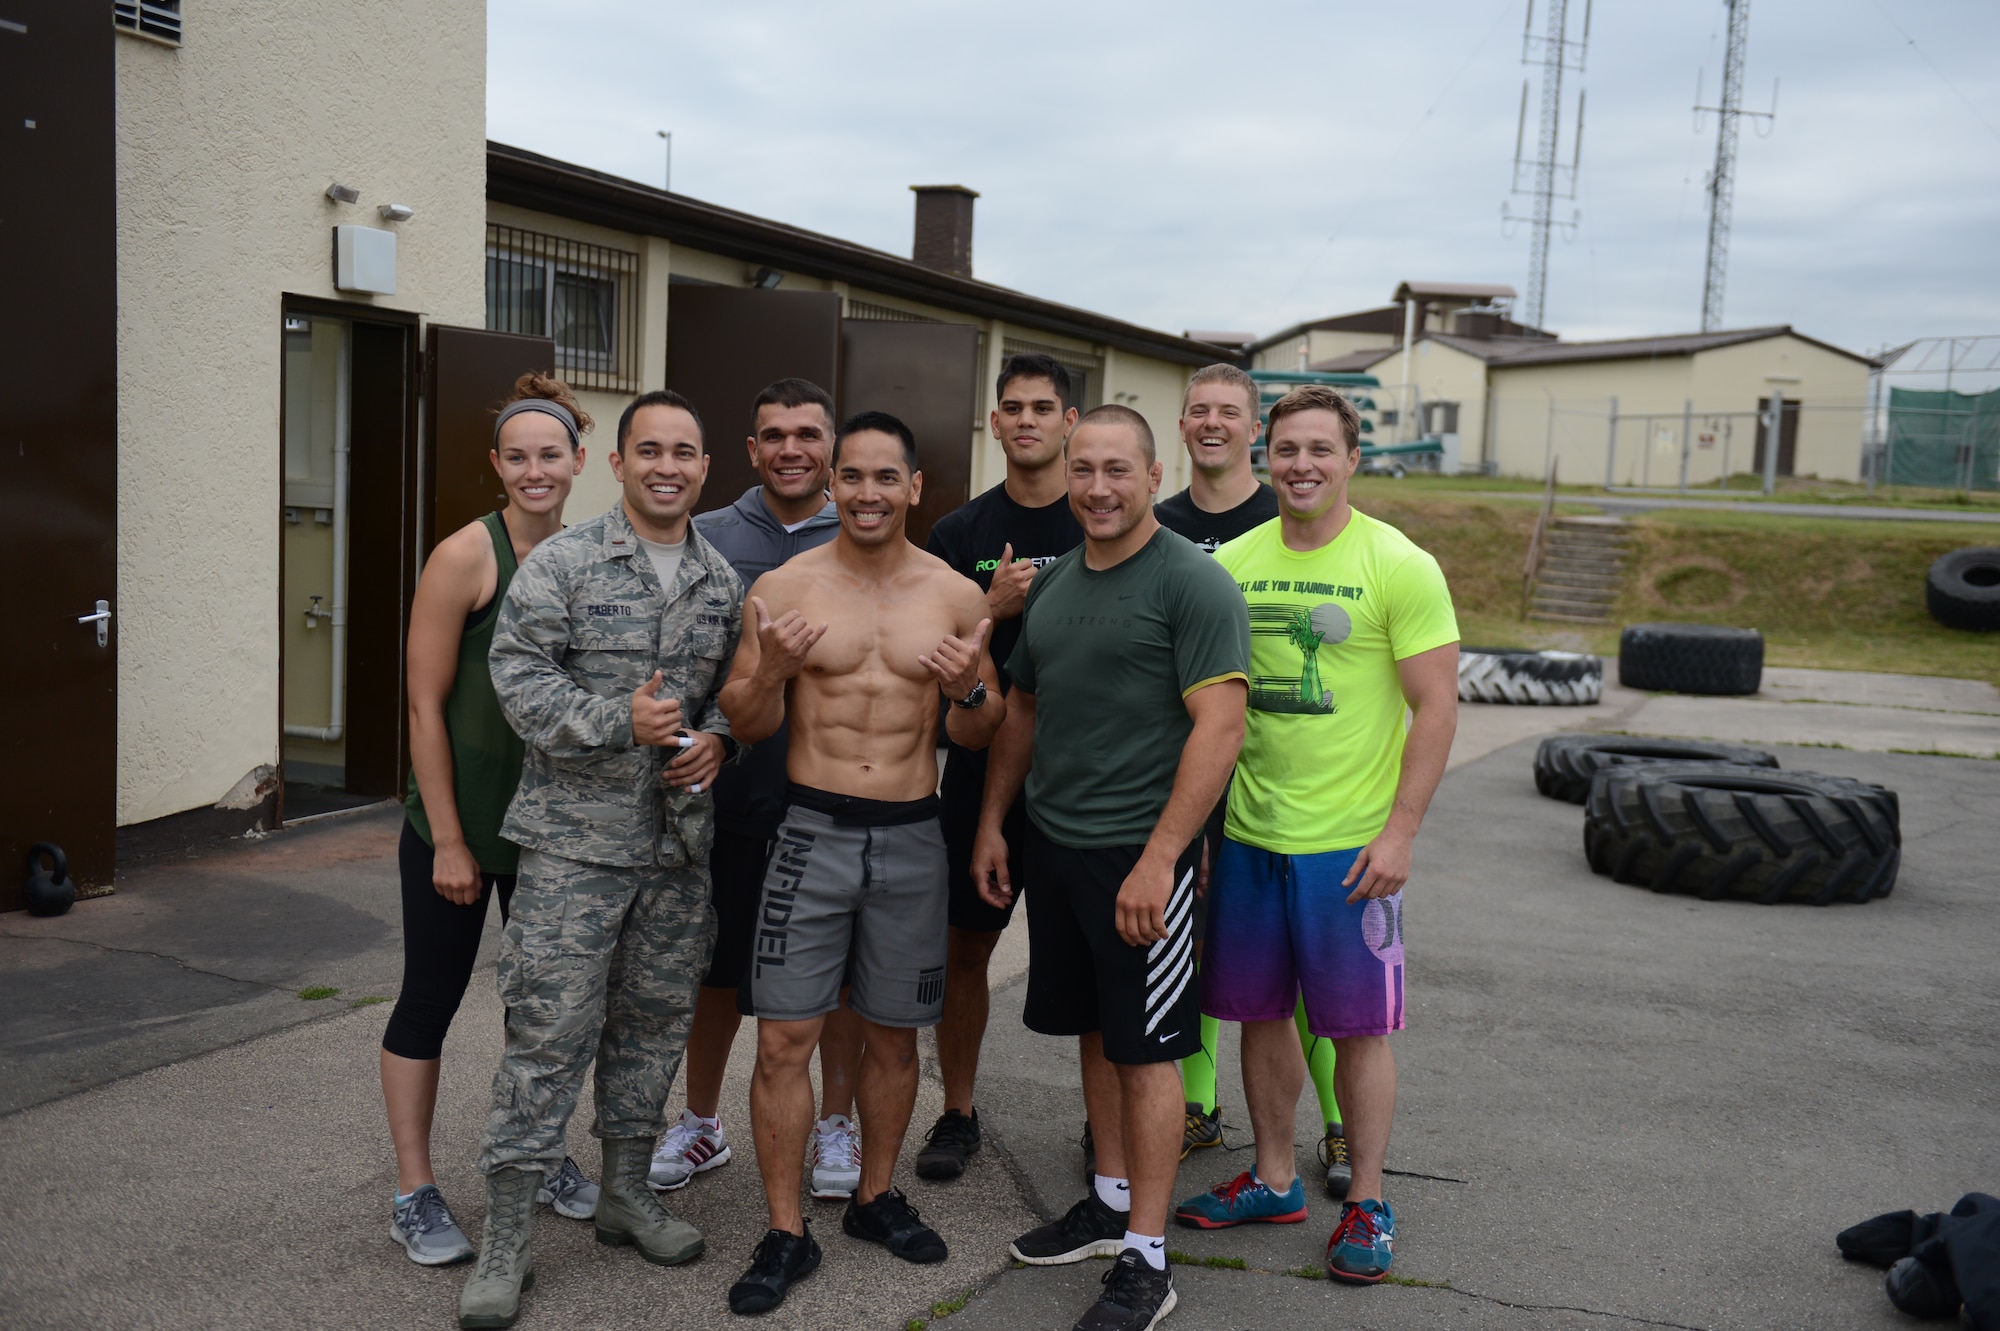 SPANGDAHLEM AIR BASE, Germany – Airmen from Spangdahlem AB pose with Ultimate Fighting Championship fighters Michael Pierce and Edgar Mendez after a combat fitness workout at the fitness assessment cell Aug. 8, 2013. The visit will last until Aug. 10, where the fighters will join Airmen for a televised UFC fight viewing inside Club Eifel. (U.S. Air Force photo by Airman 1st Class Gustavo Castillo/Released)